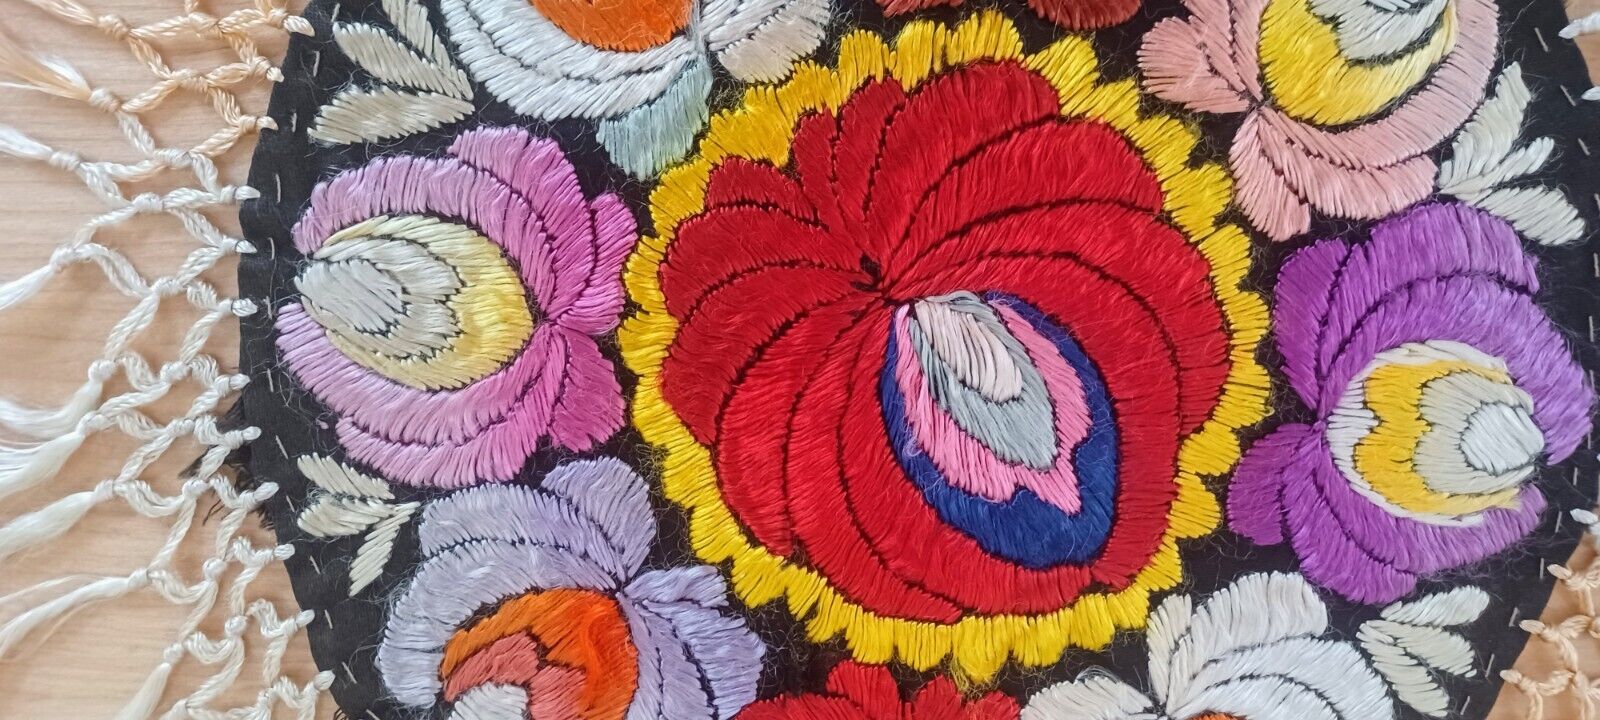 Vintage Traditional Hungarian Folk Art Embroidery